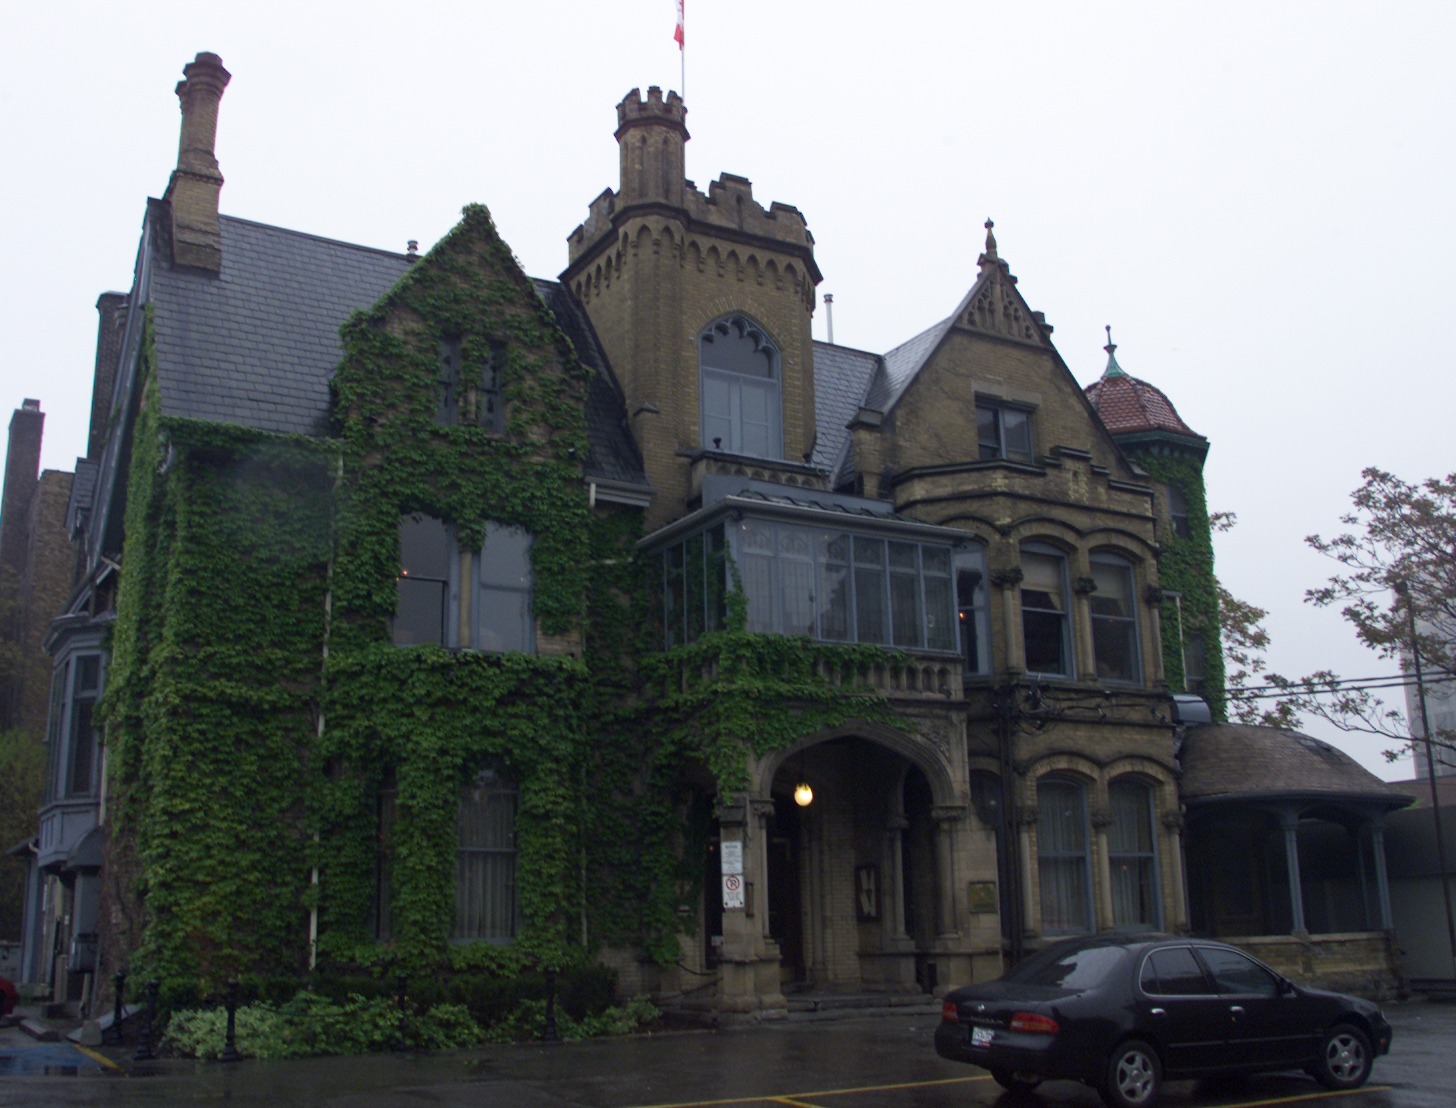 Victorian building partially covered in ivy.